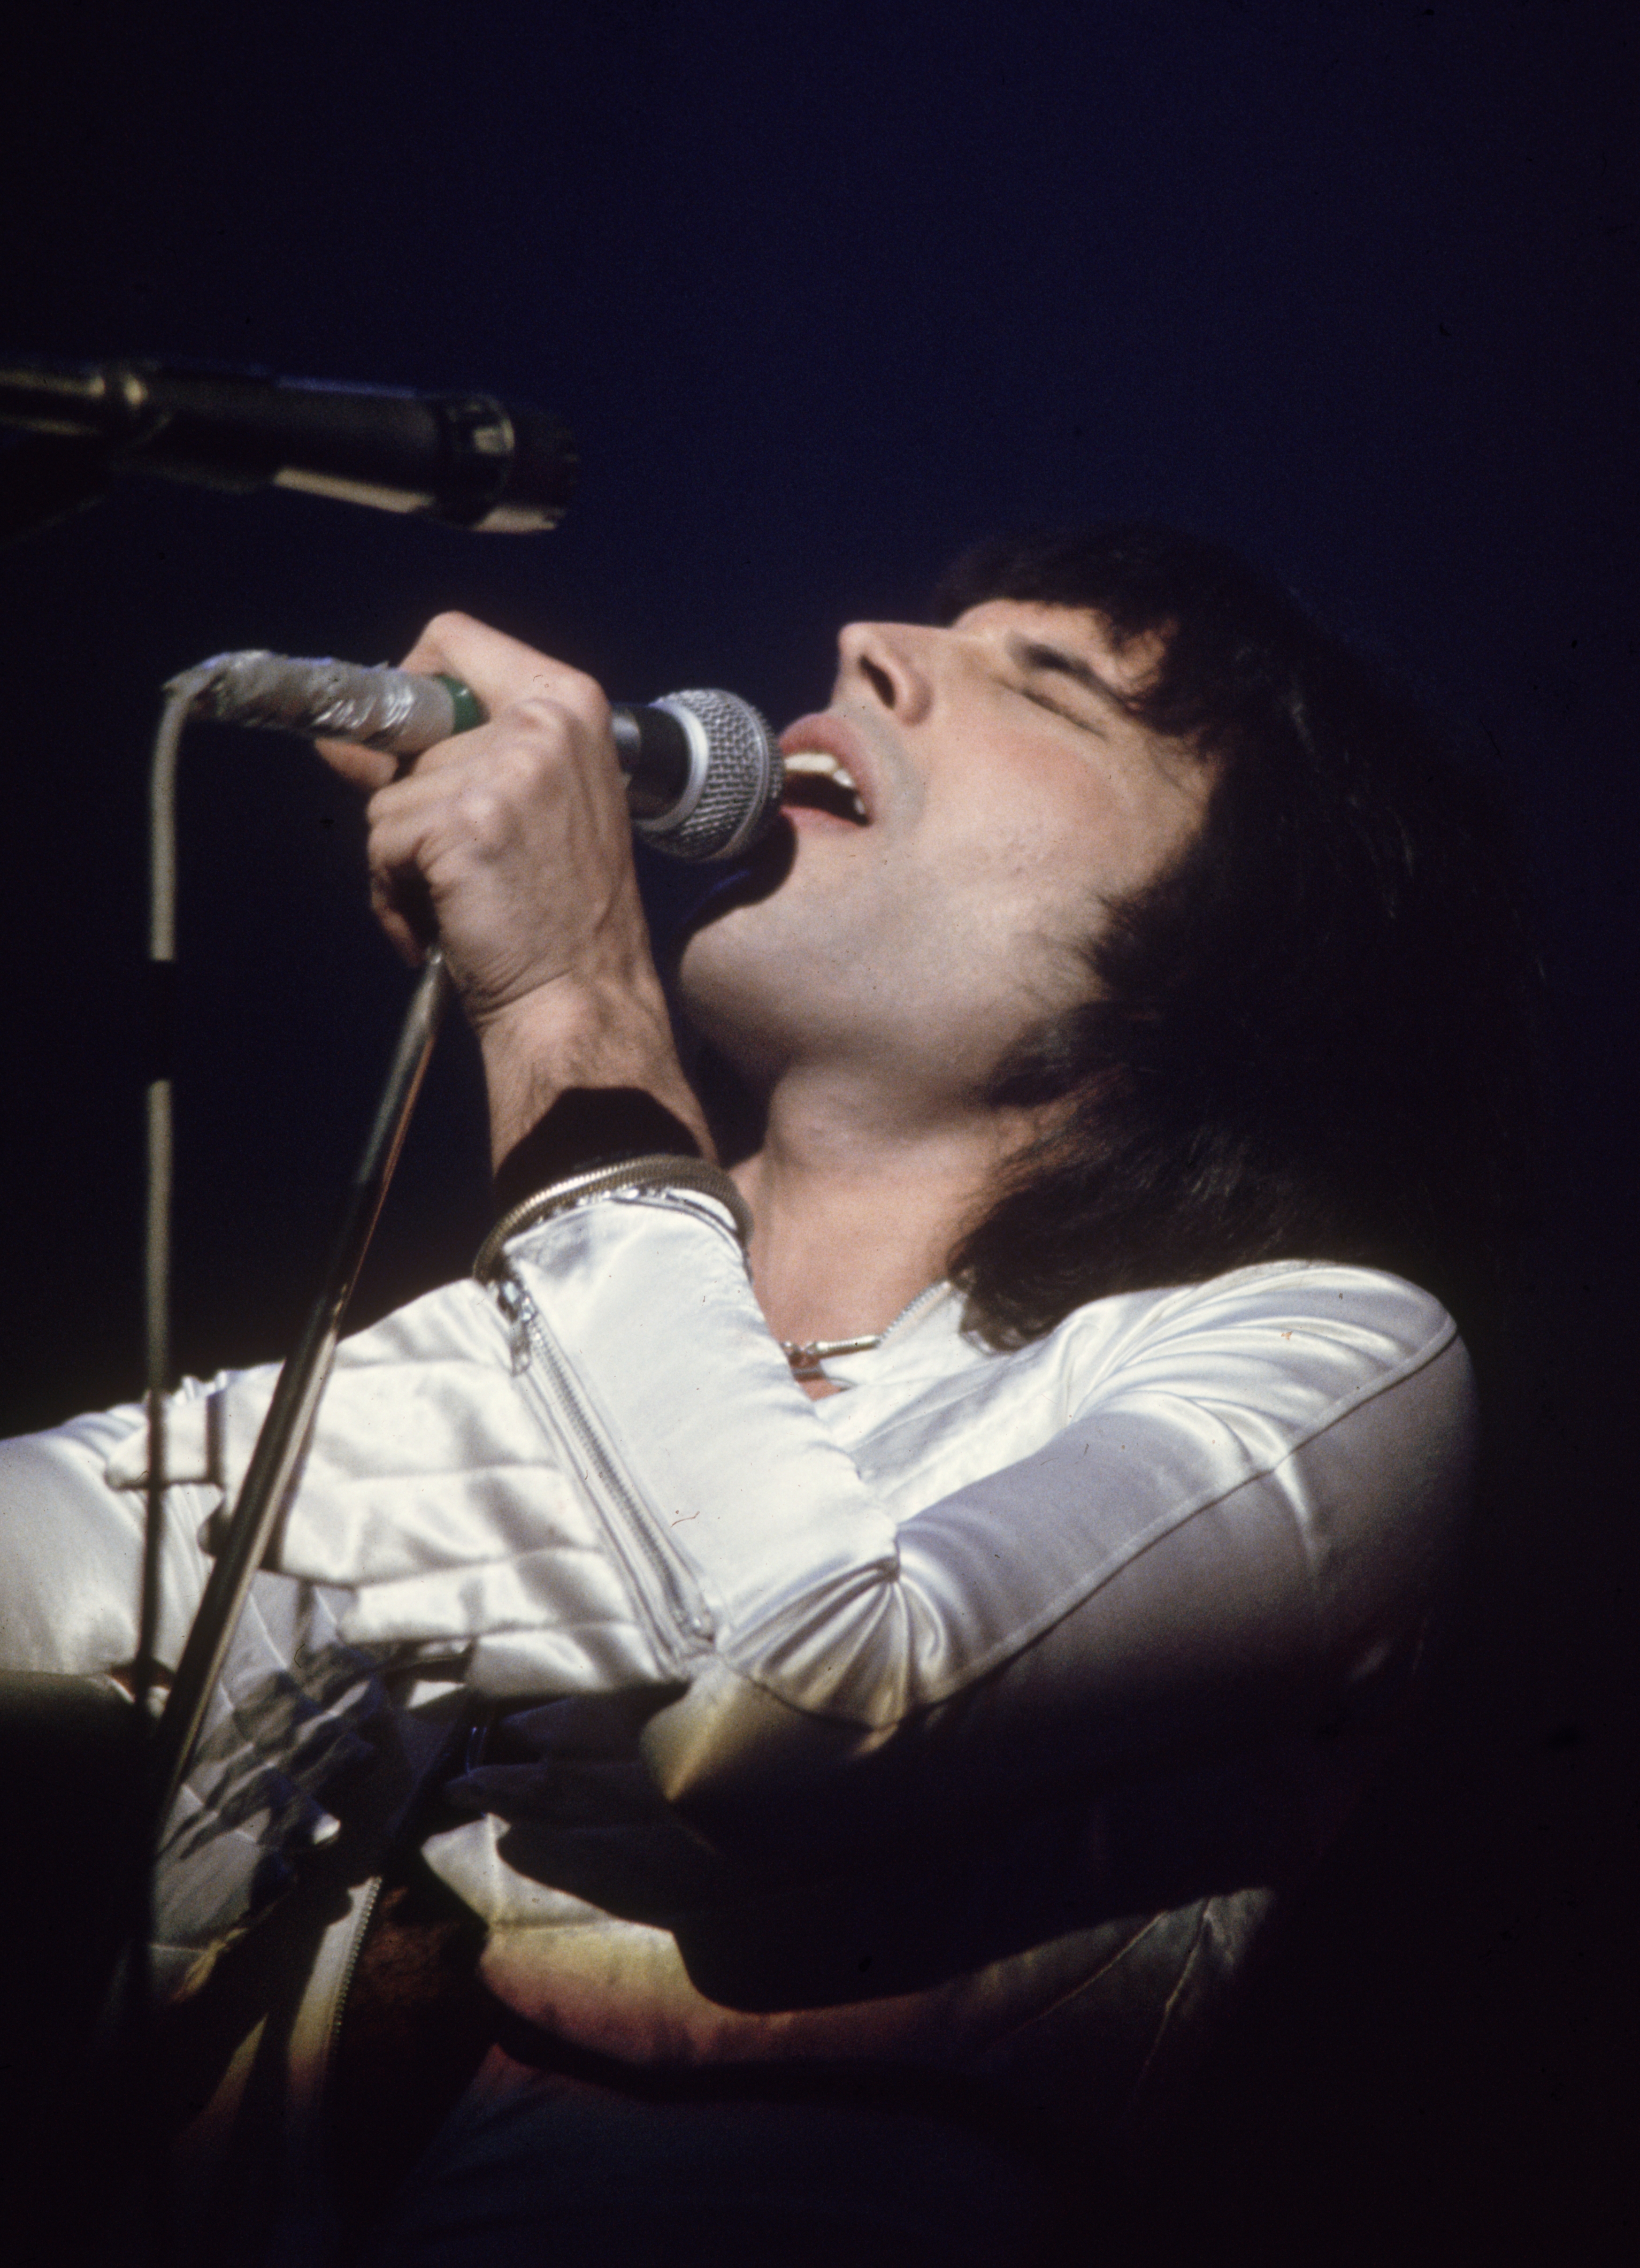 circa 1975: Freddie Mercury (1946 - 1991), lead singer of 70s hard rock quartet Queen, in concert during the group's British tour. (Photo by Keystone/Getty Images)